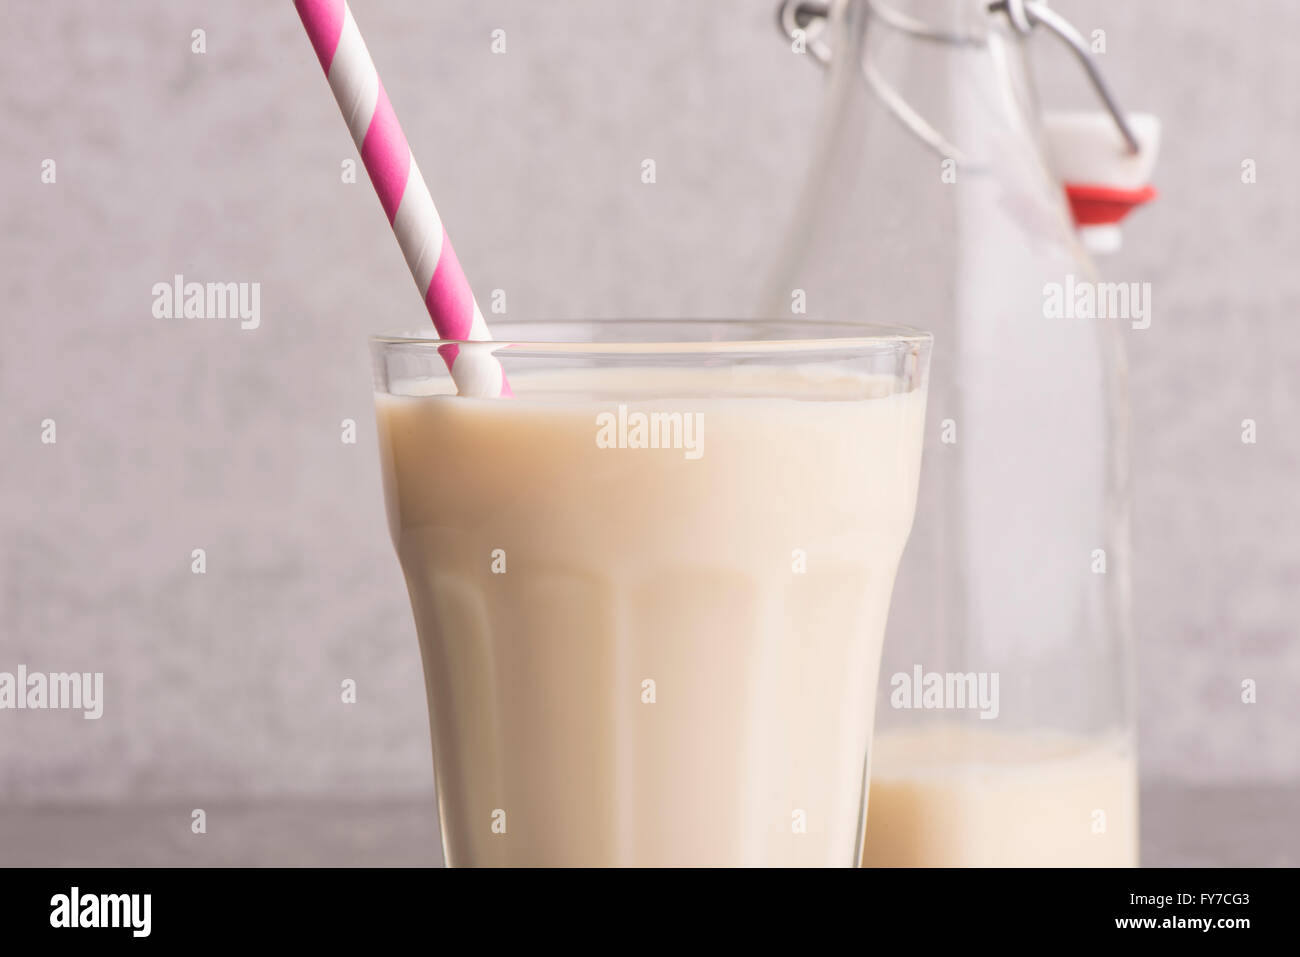 Soy milk in a glass with striped drinking straw and glass bottle on stone table. Stock Photo